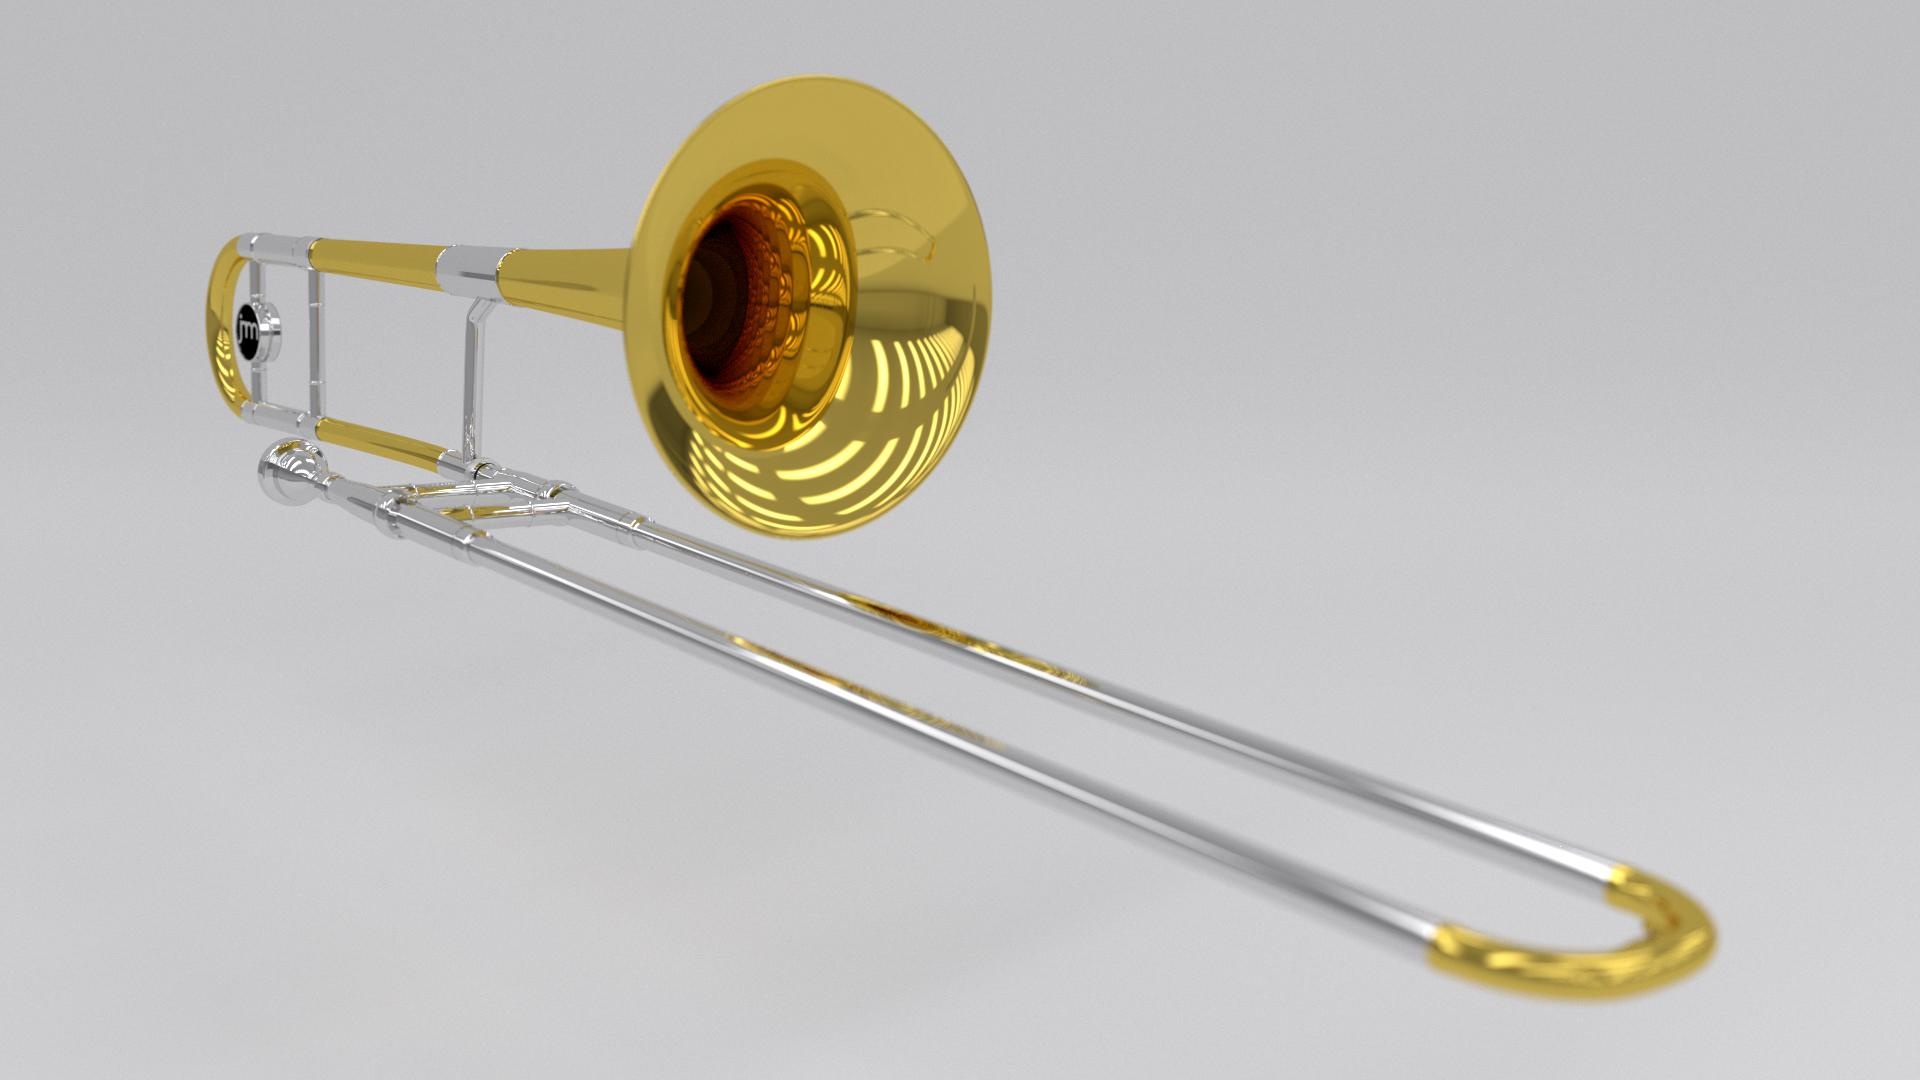 Trombone wallpapers, HD quality, Artistic visuals, Musical expression, 1920x1080 Full HD Desktop